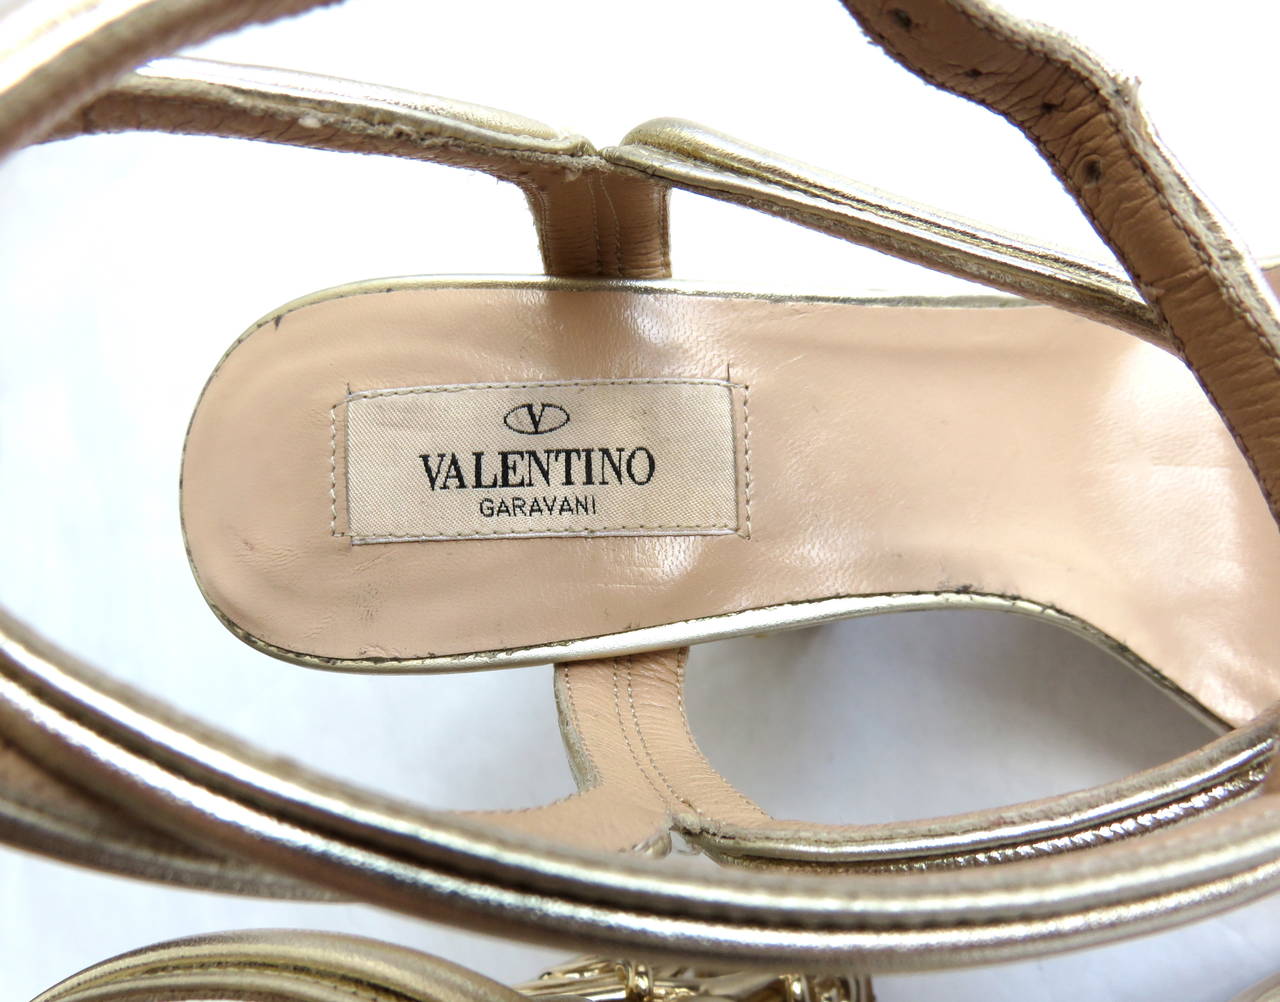 VALENTINO Metallic gold leather & metal cage heels shoes 5